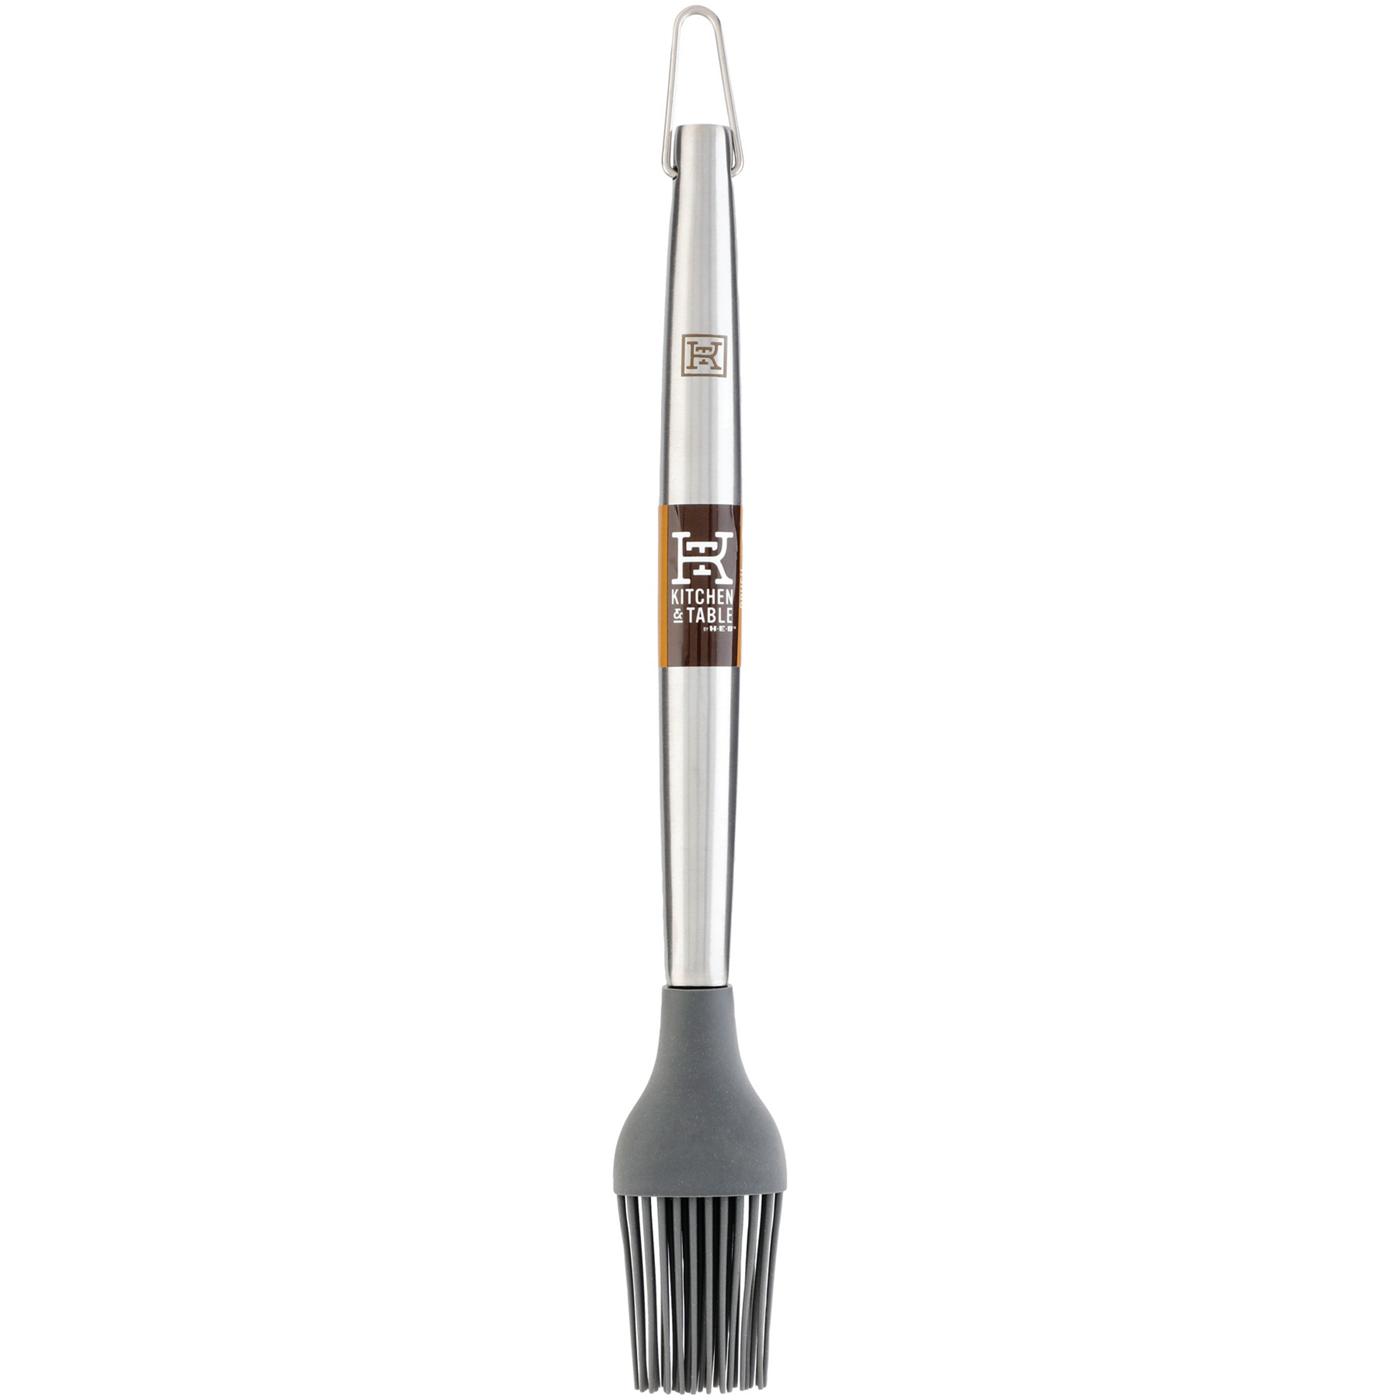 Kitchen & Table by H-E-B Basting Brush - Shop Utensils & Gadgets